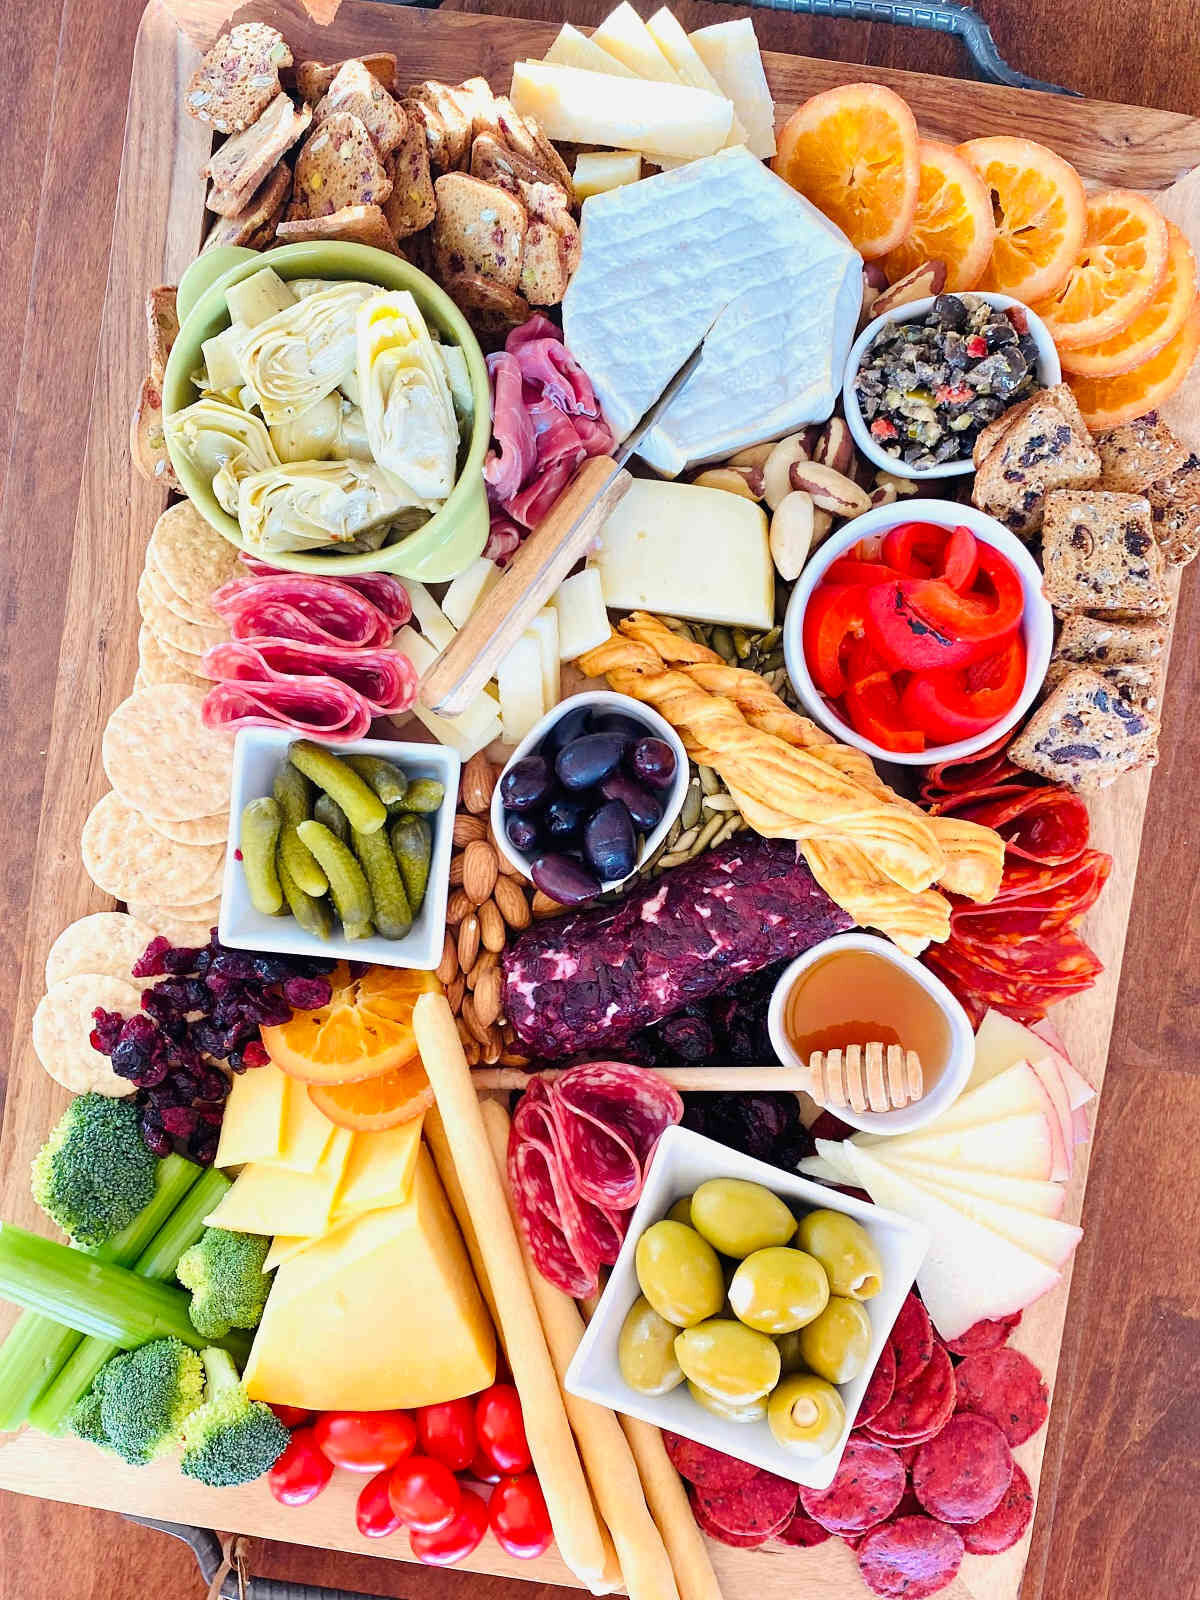 Trader Joe's Charcuterie board with meats cheeses, pickles and olives